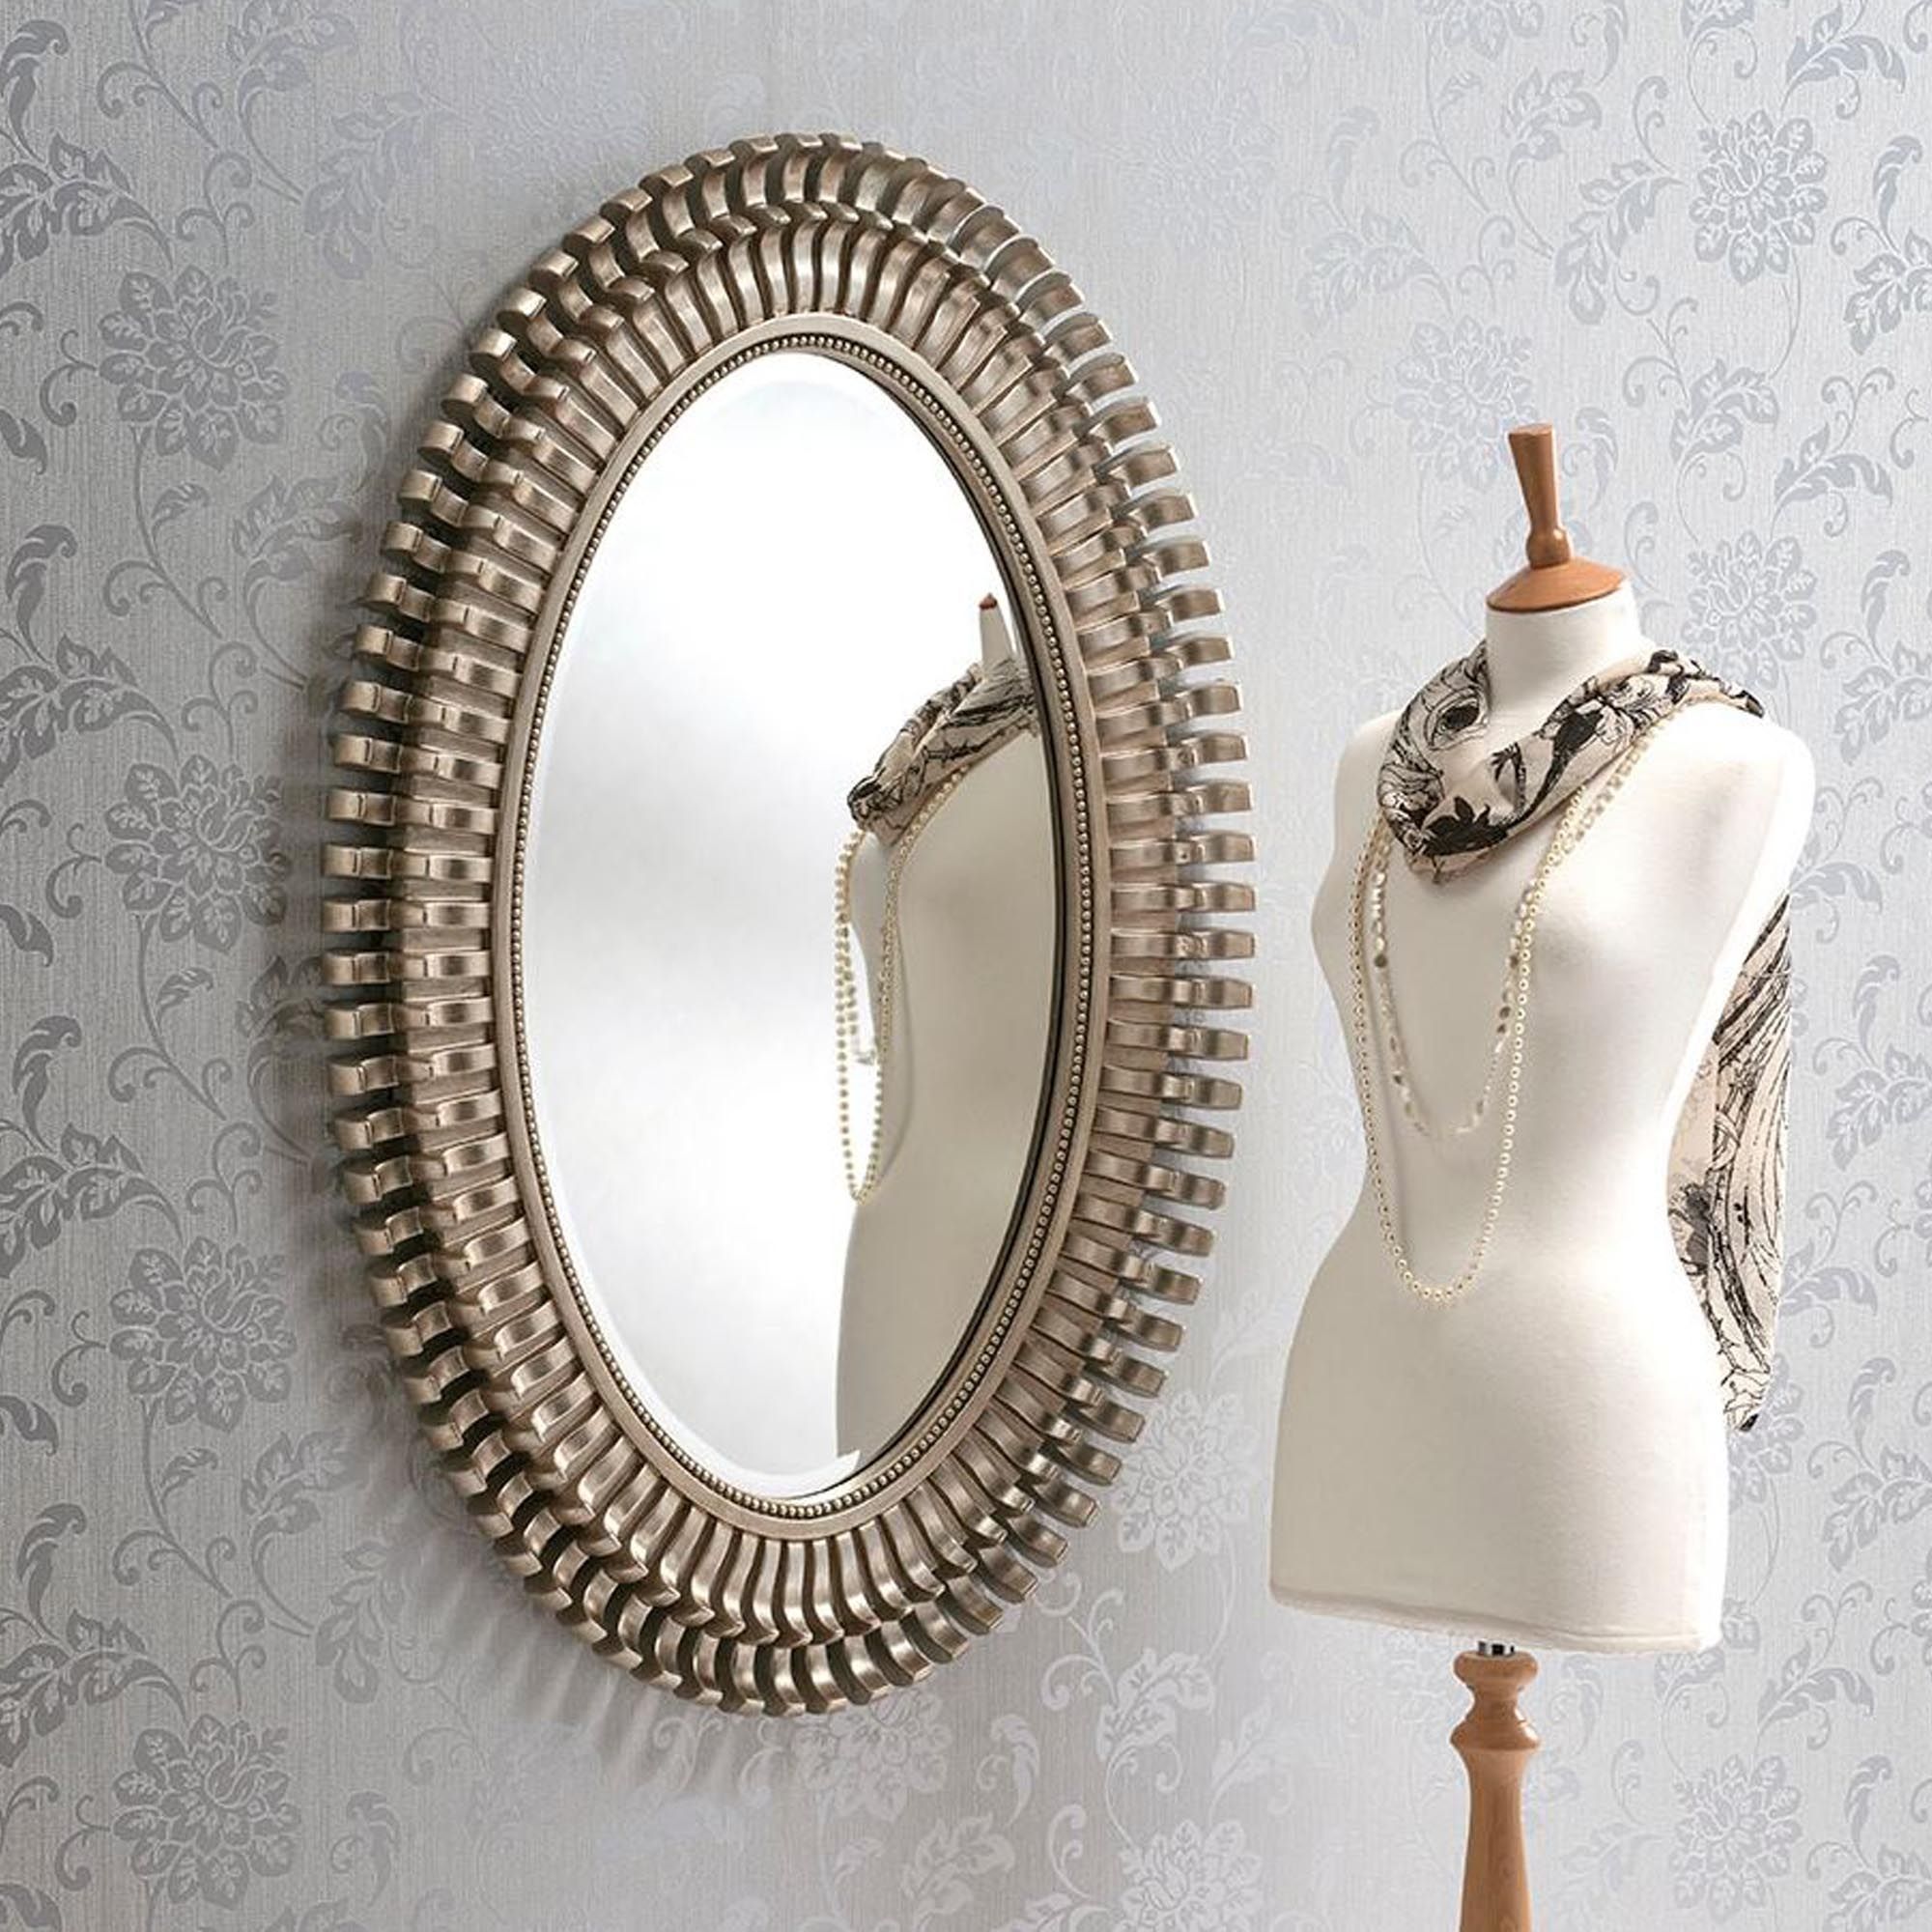 Oval Contemporary Antique Silver Wall Mirror | Homesdirect365 With Silver Asymmetrical Wall Mirrors (View 10 of 15)